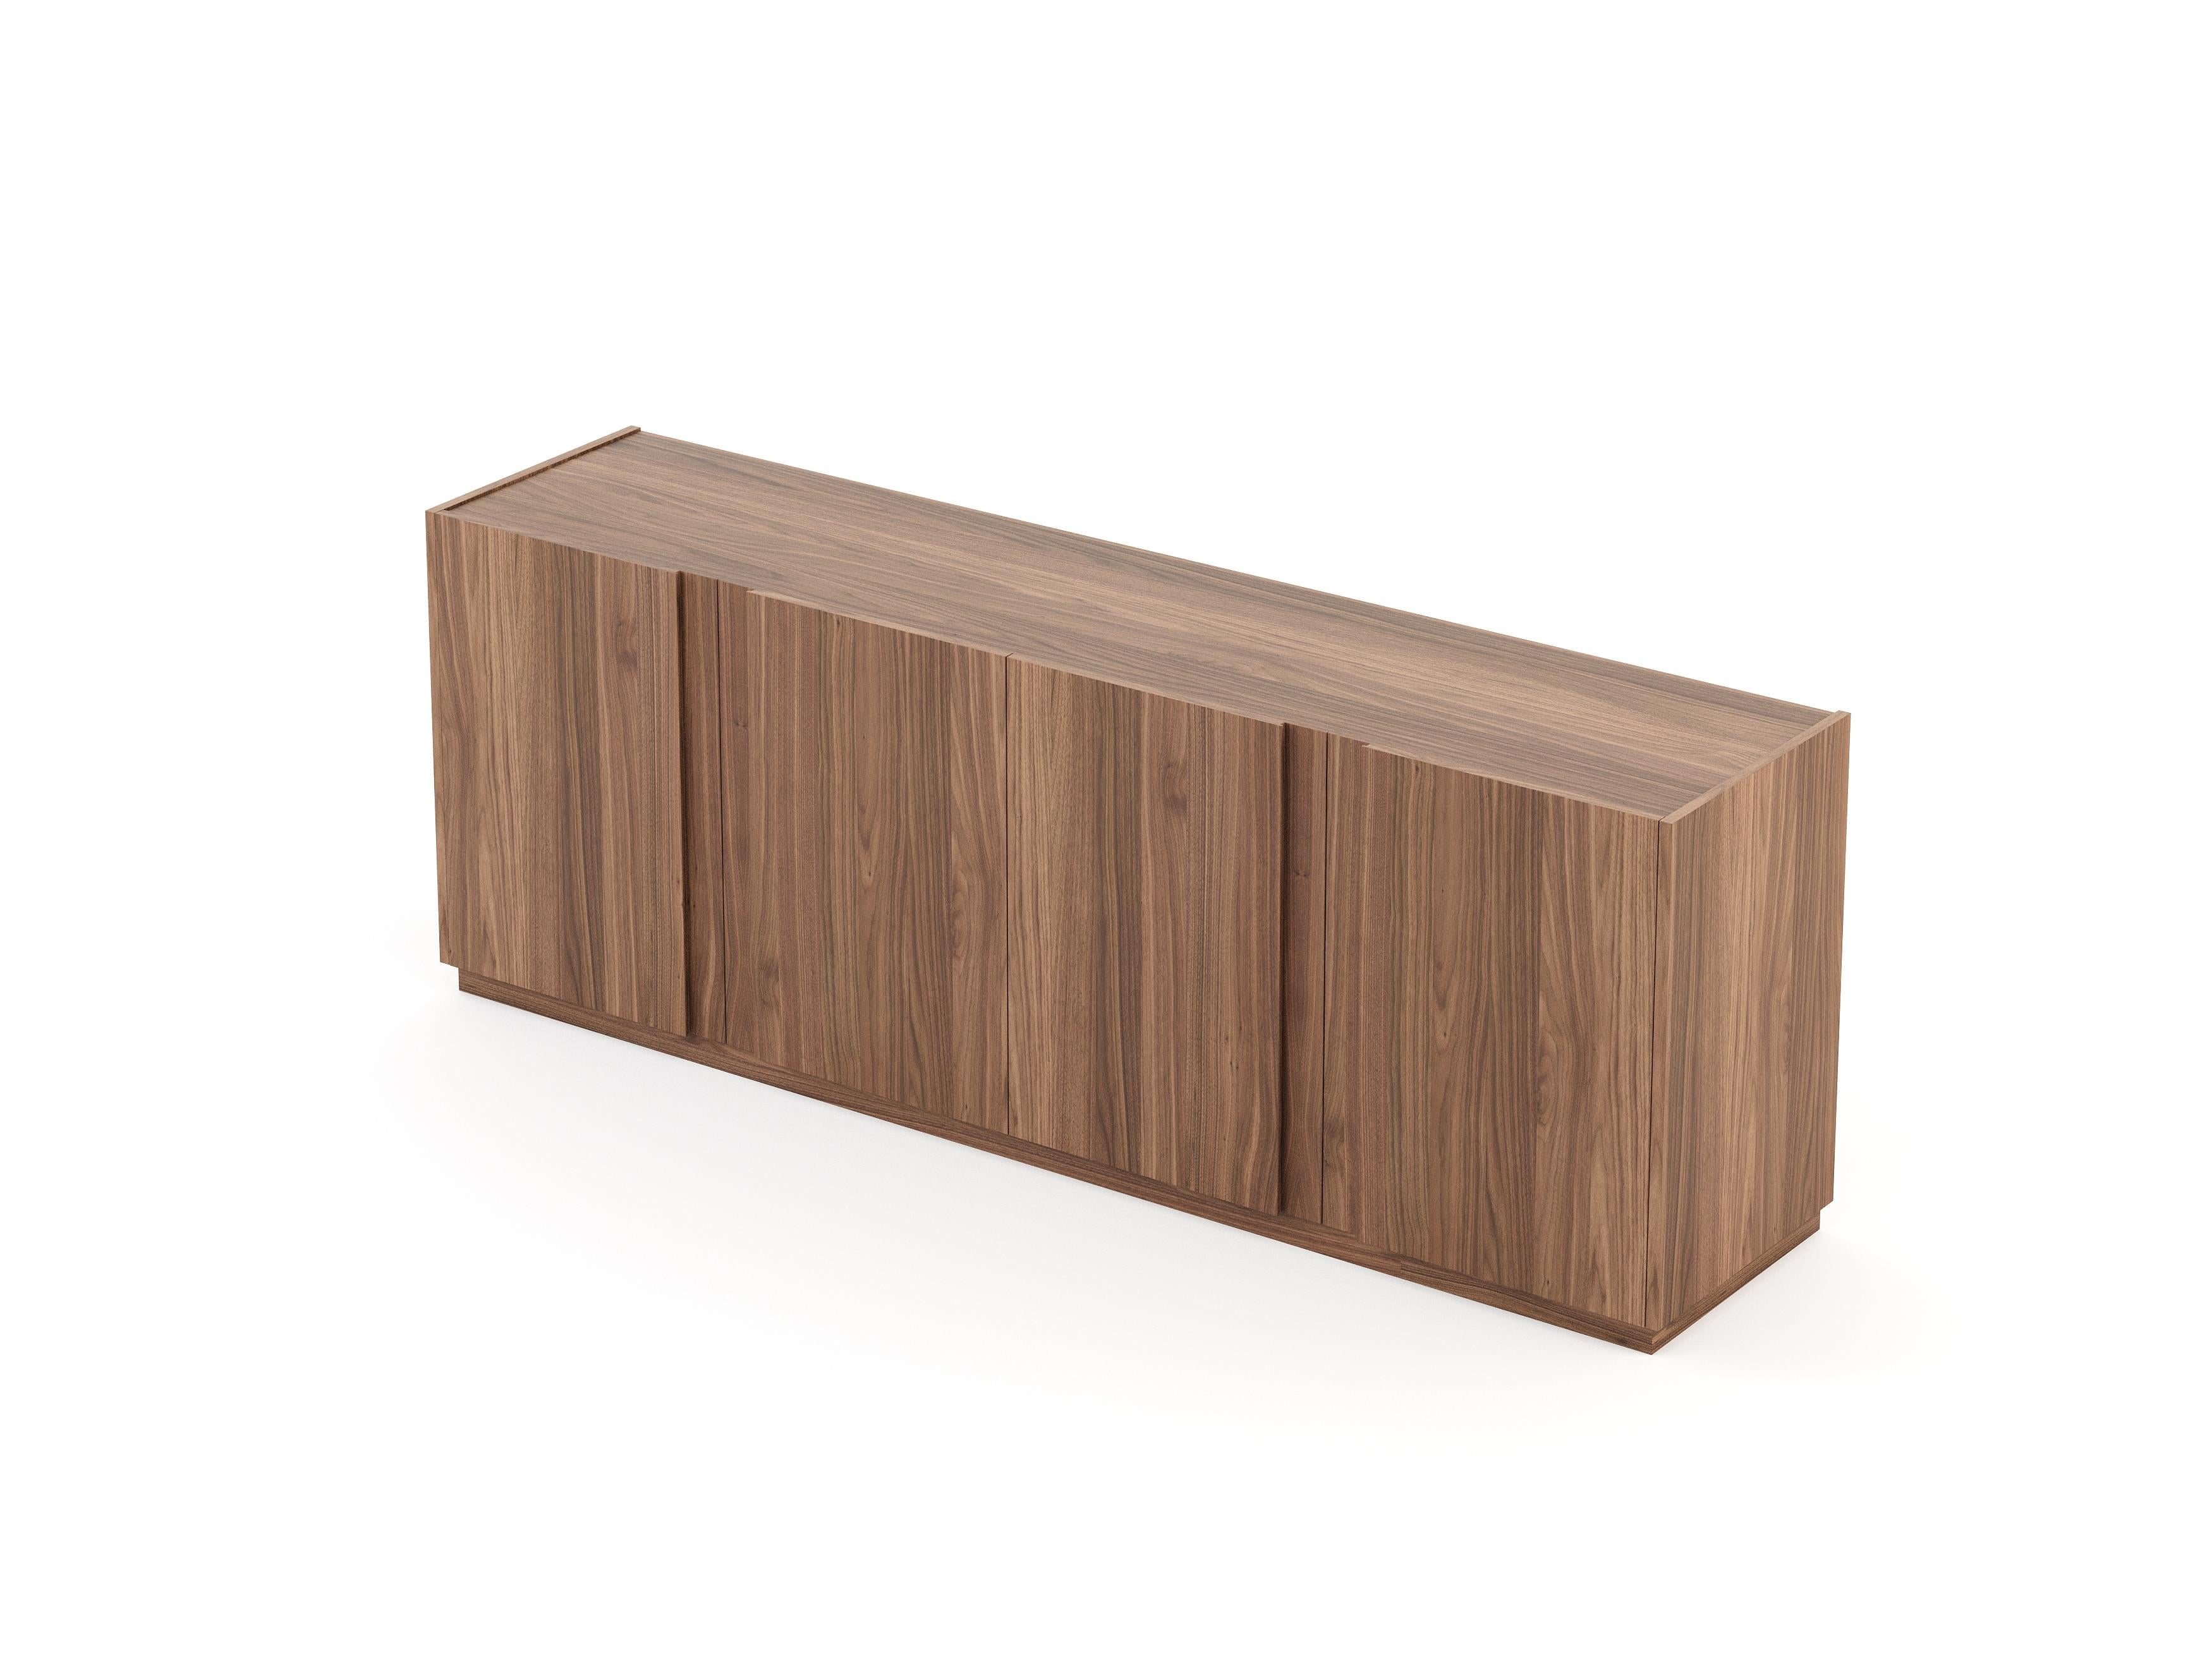 Portuguese Modern Sevilha Sideboard Made with Walnut, Handmade by Stylish Club For Sale